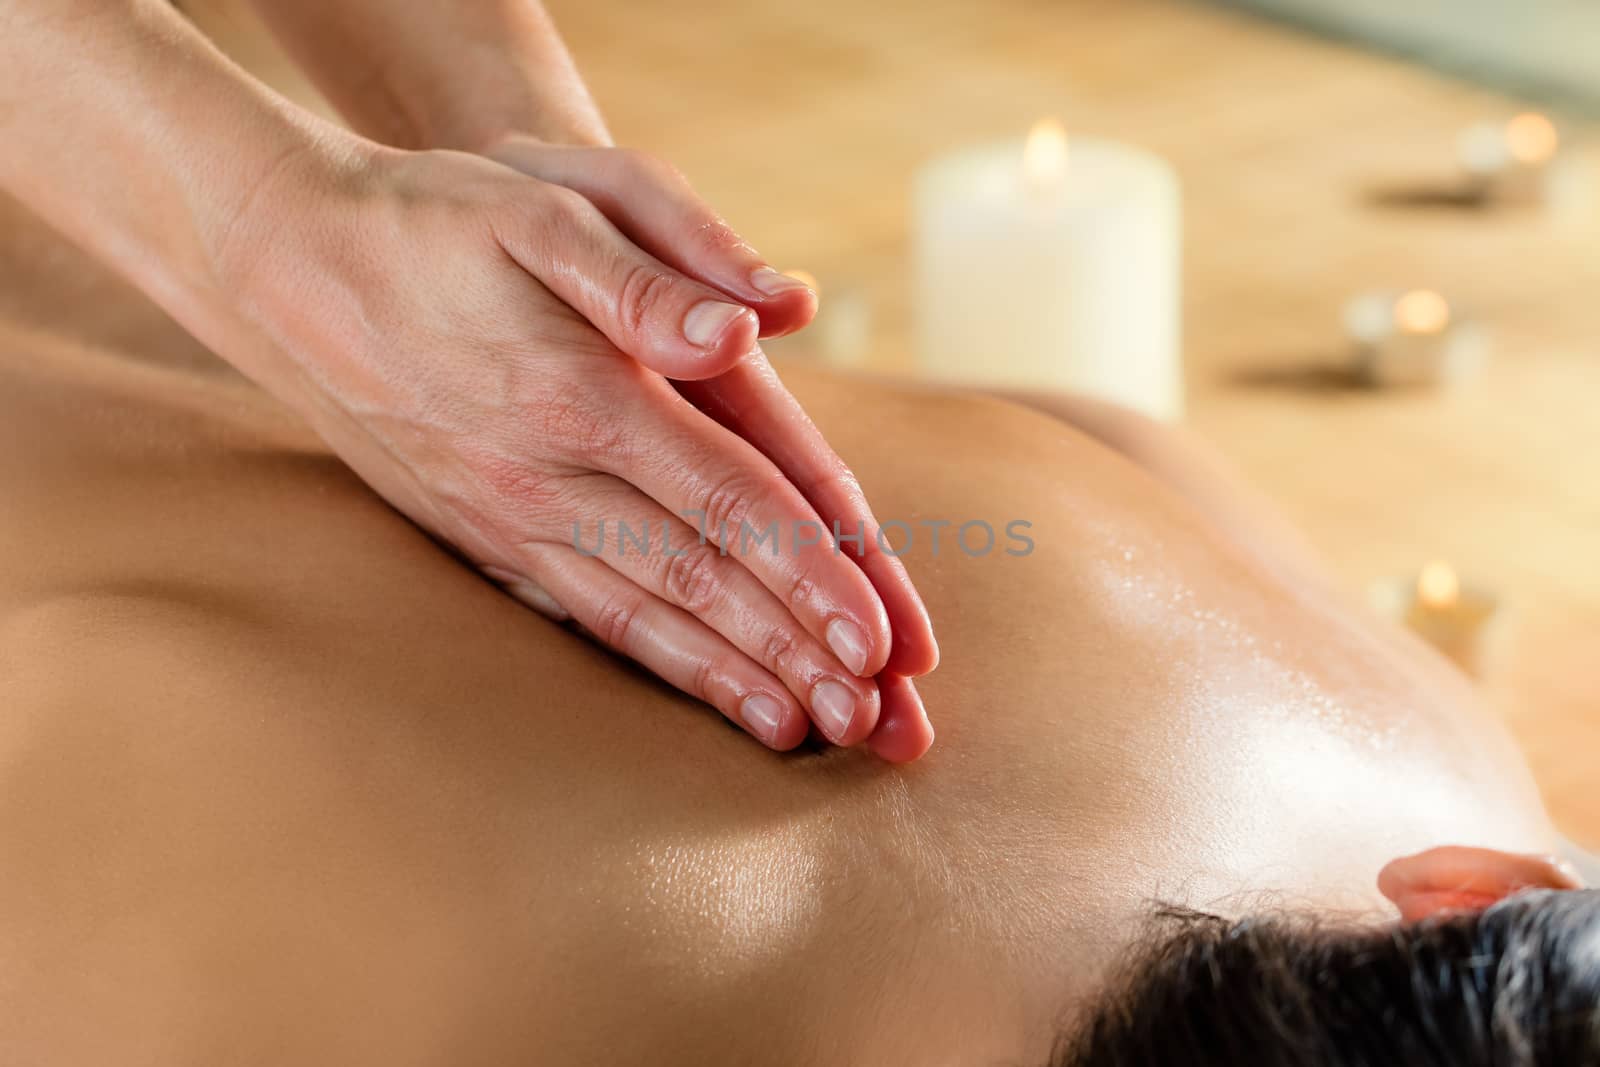 Hands massaging spinal column on woman. by karelnoppe